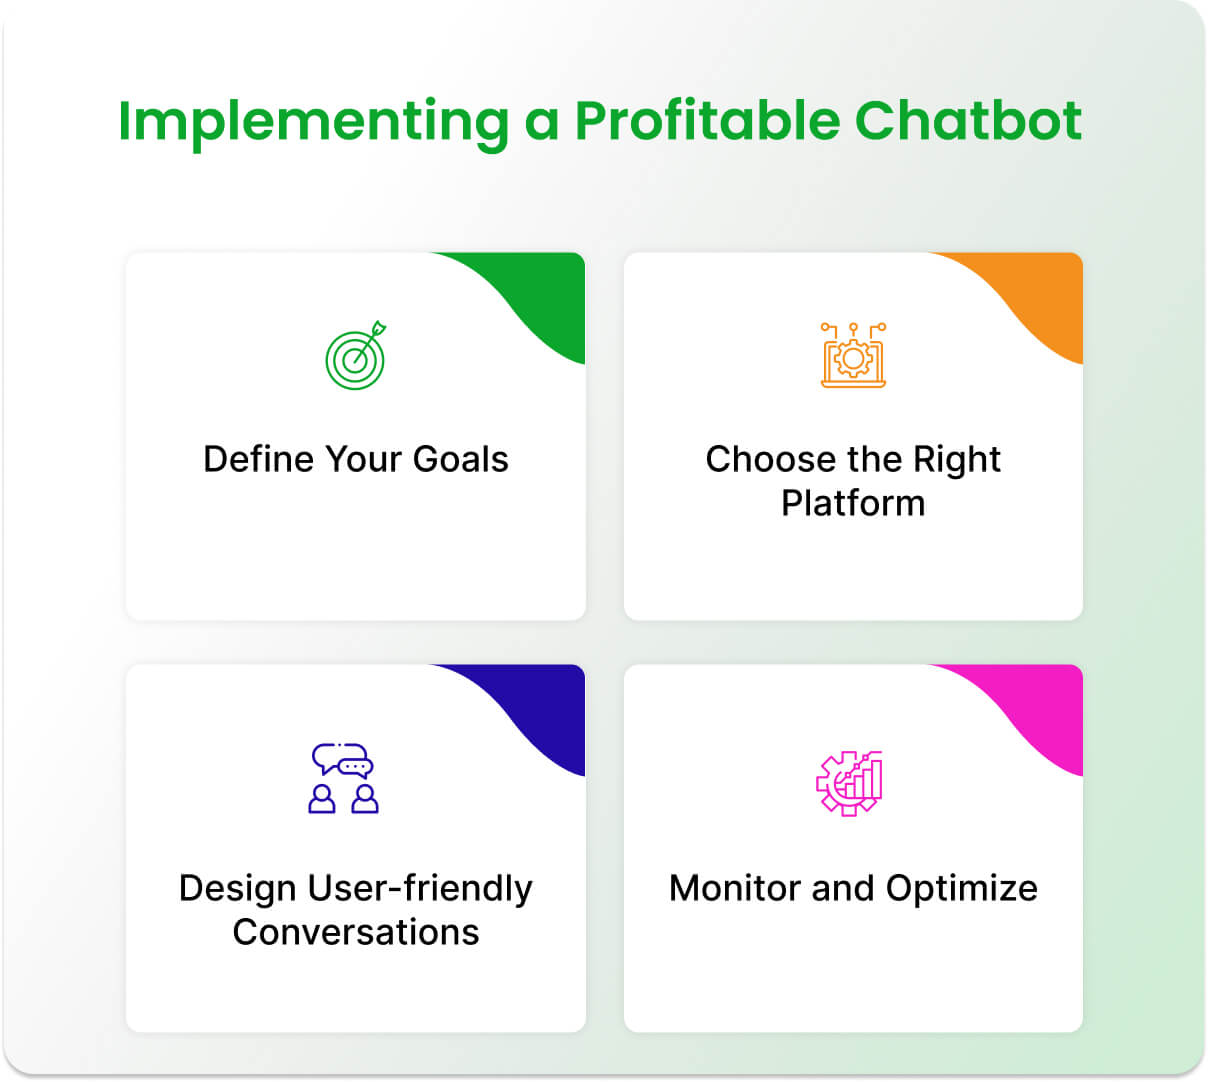 Implementing a Profitable Chatbot